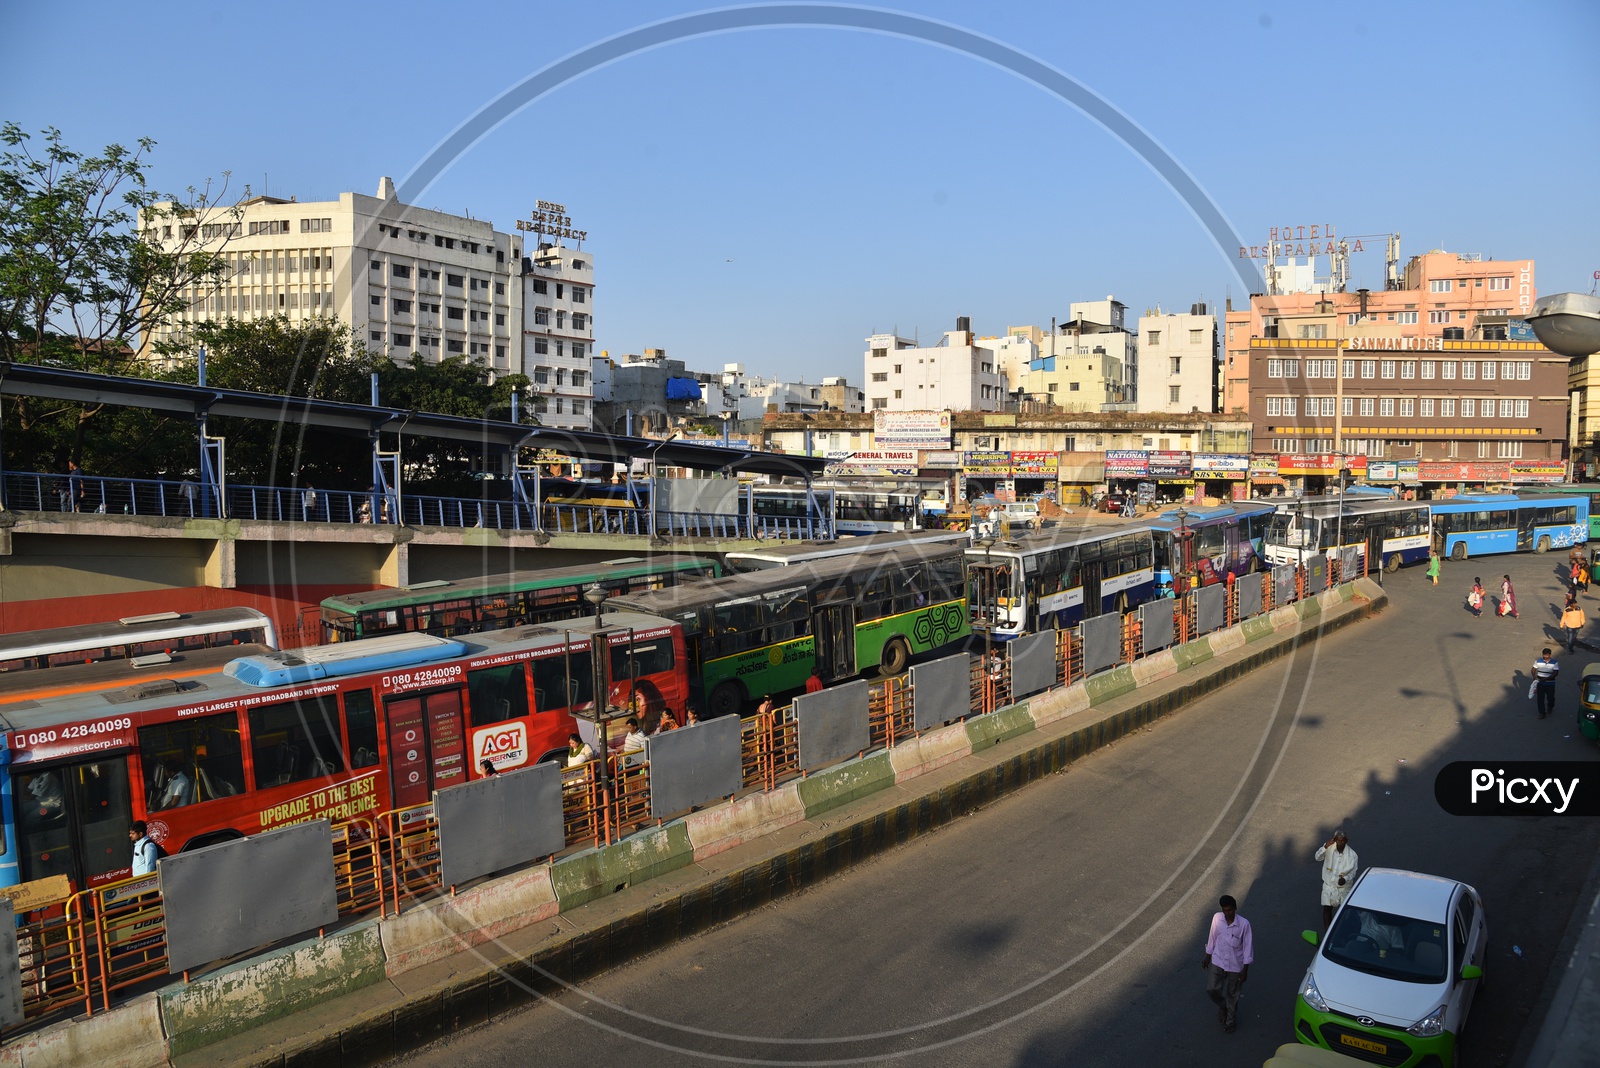 BMTC buses in Majestic bus stand, Bangalore